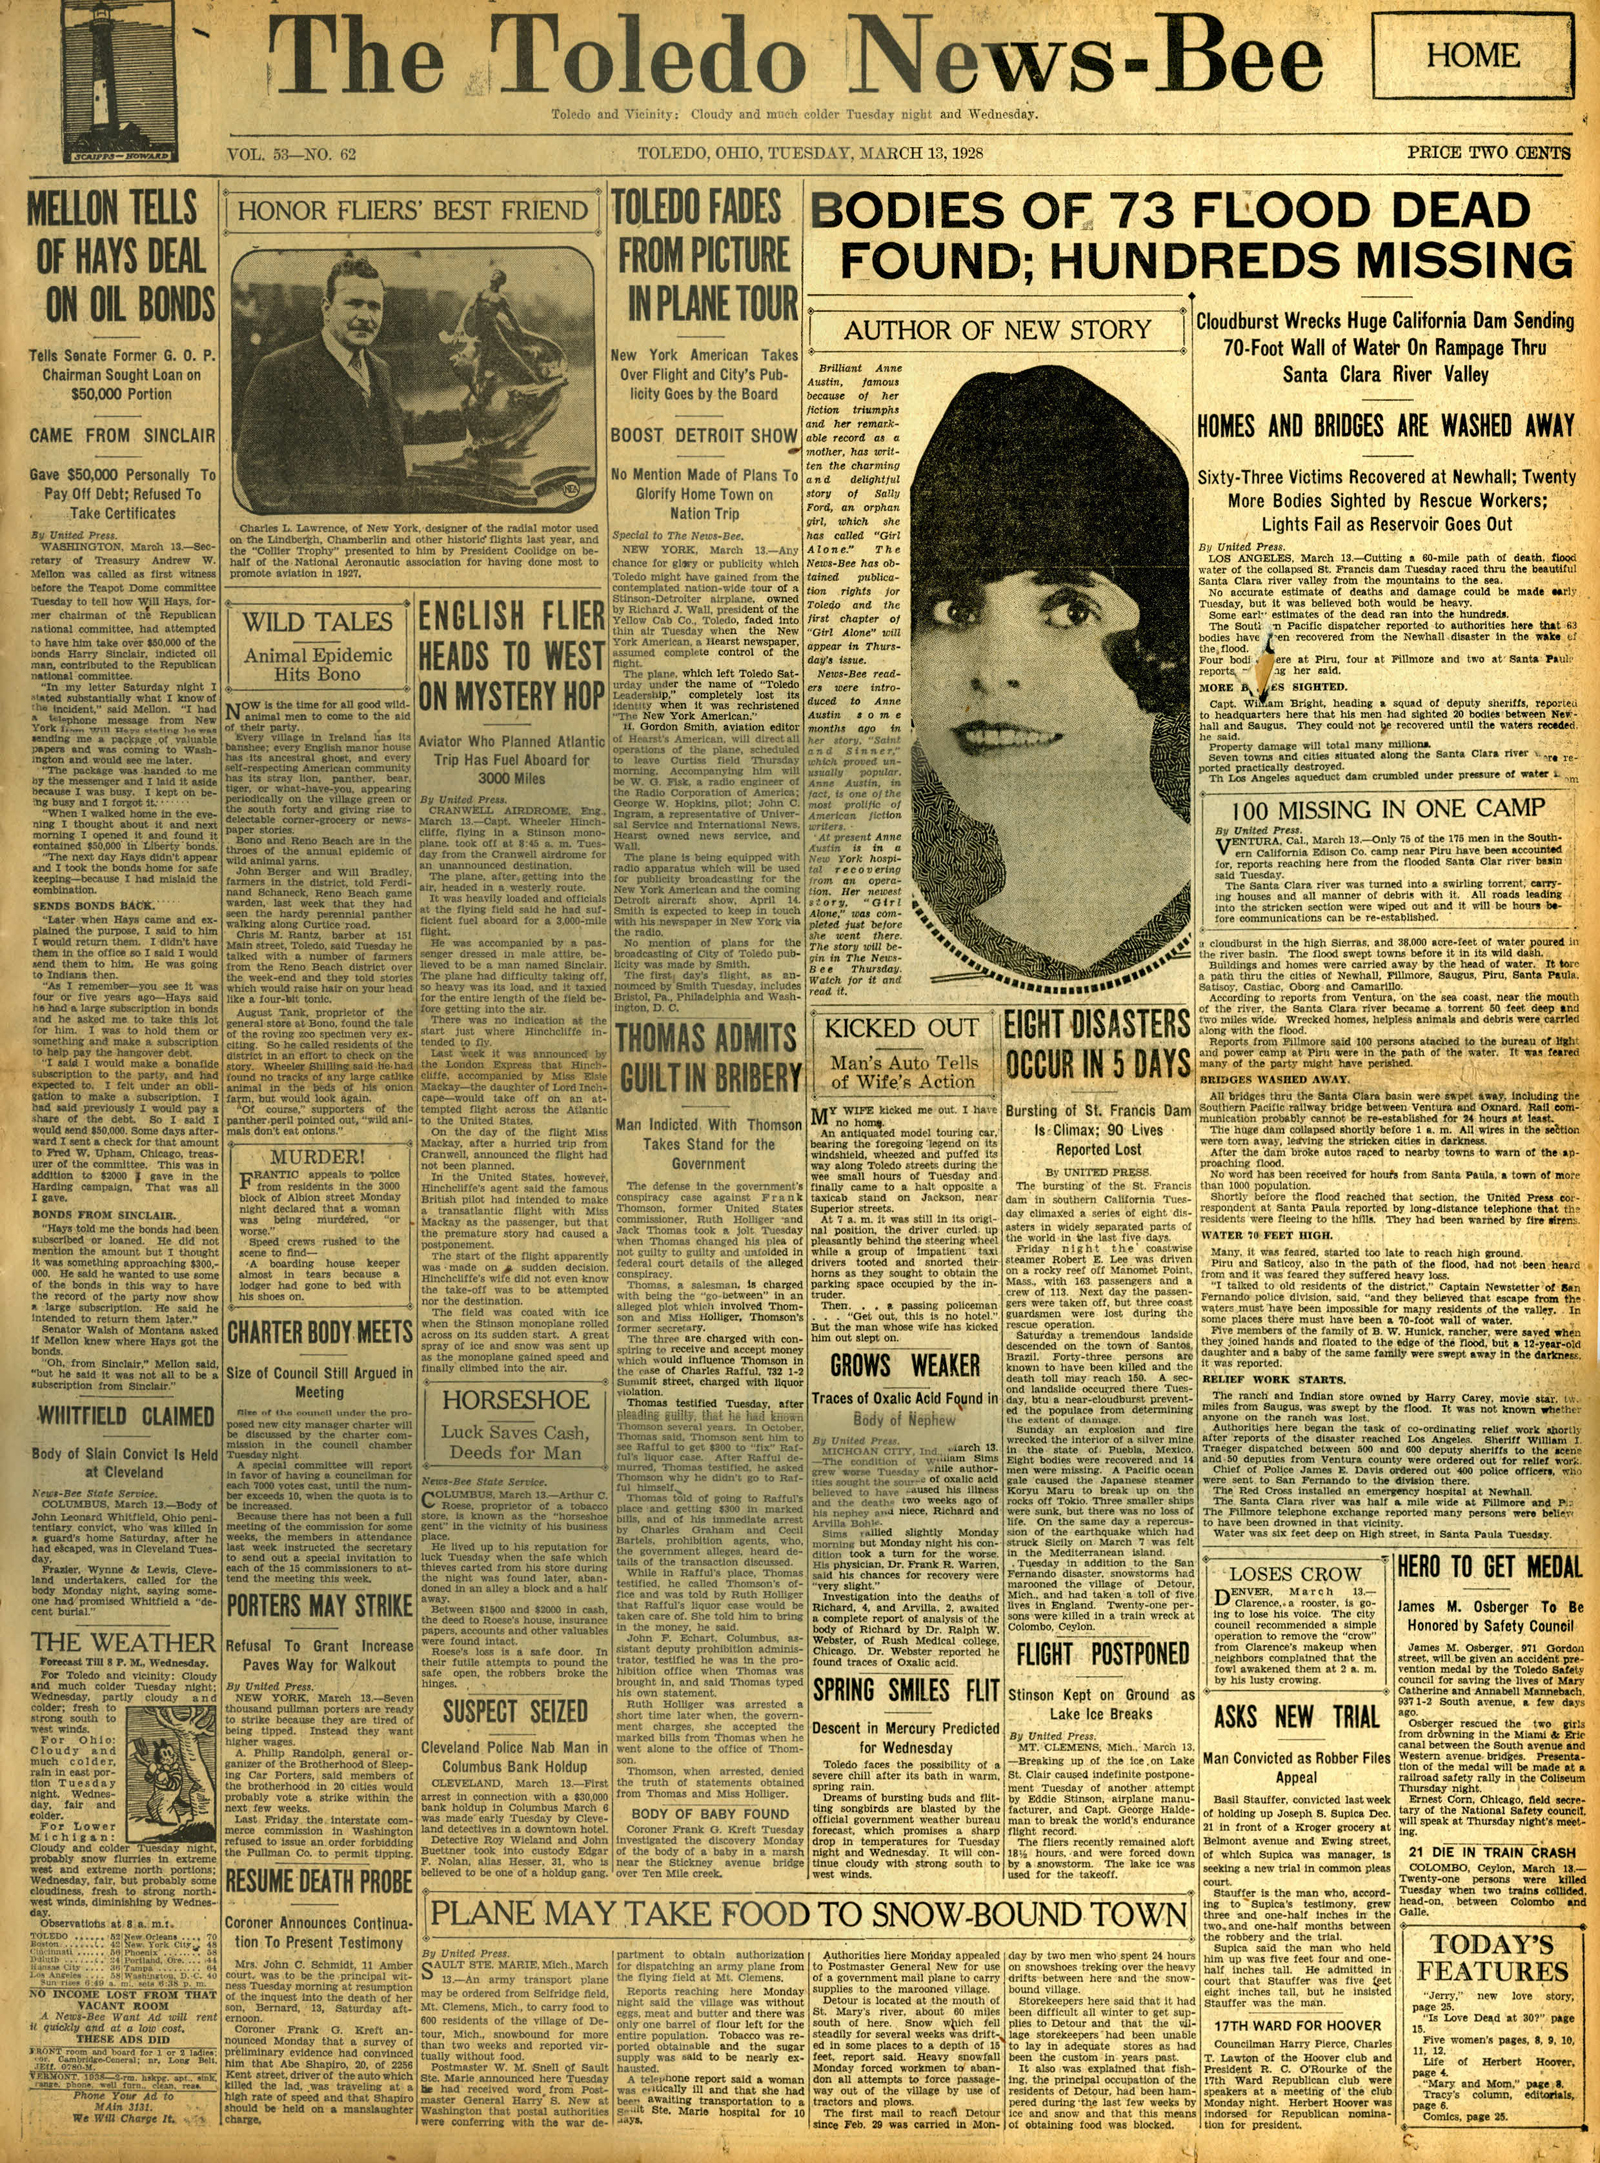 Newspapers of the St. Francis Dam Disaster.

THE TOLEDO NEWS-BEE(NEWSPAPER),

TUESDAY, MARCH 13, 1928